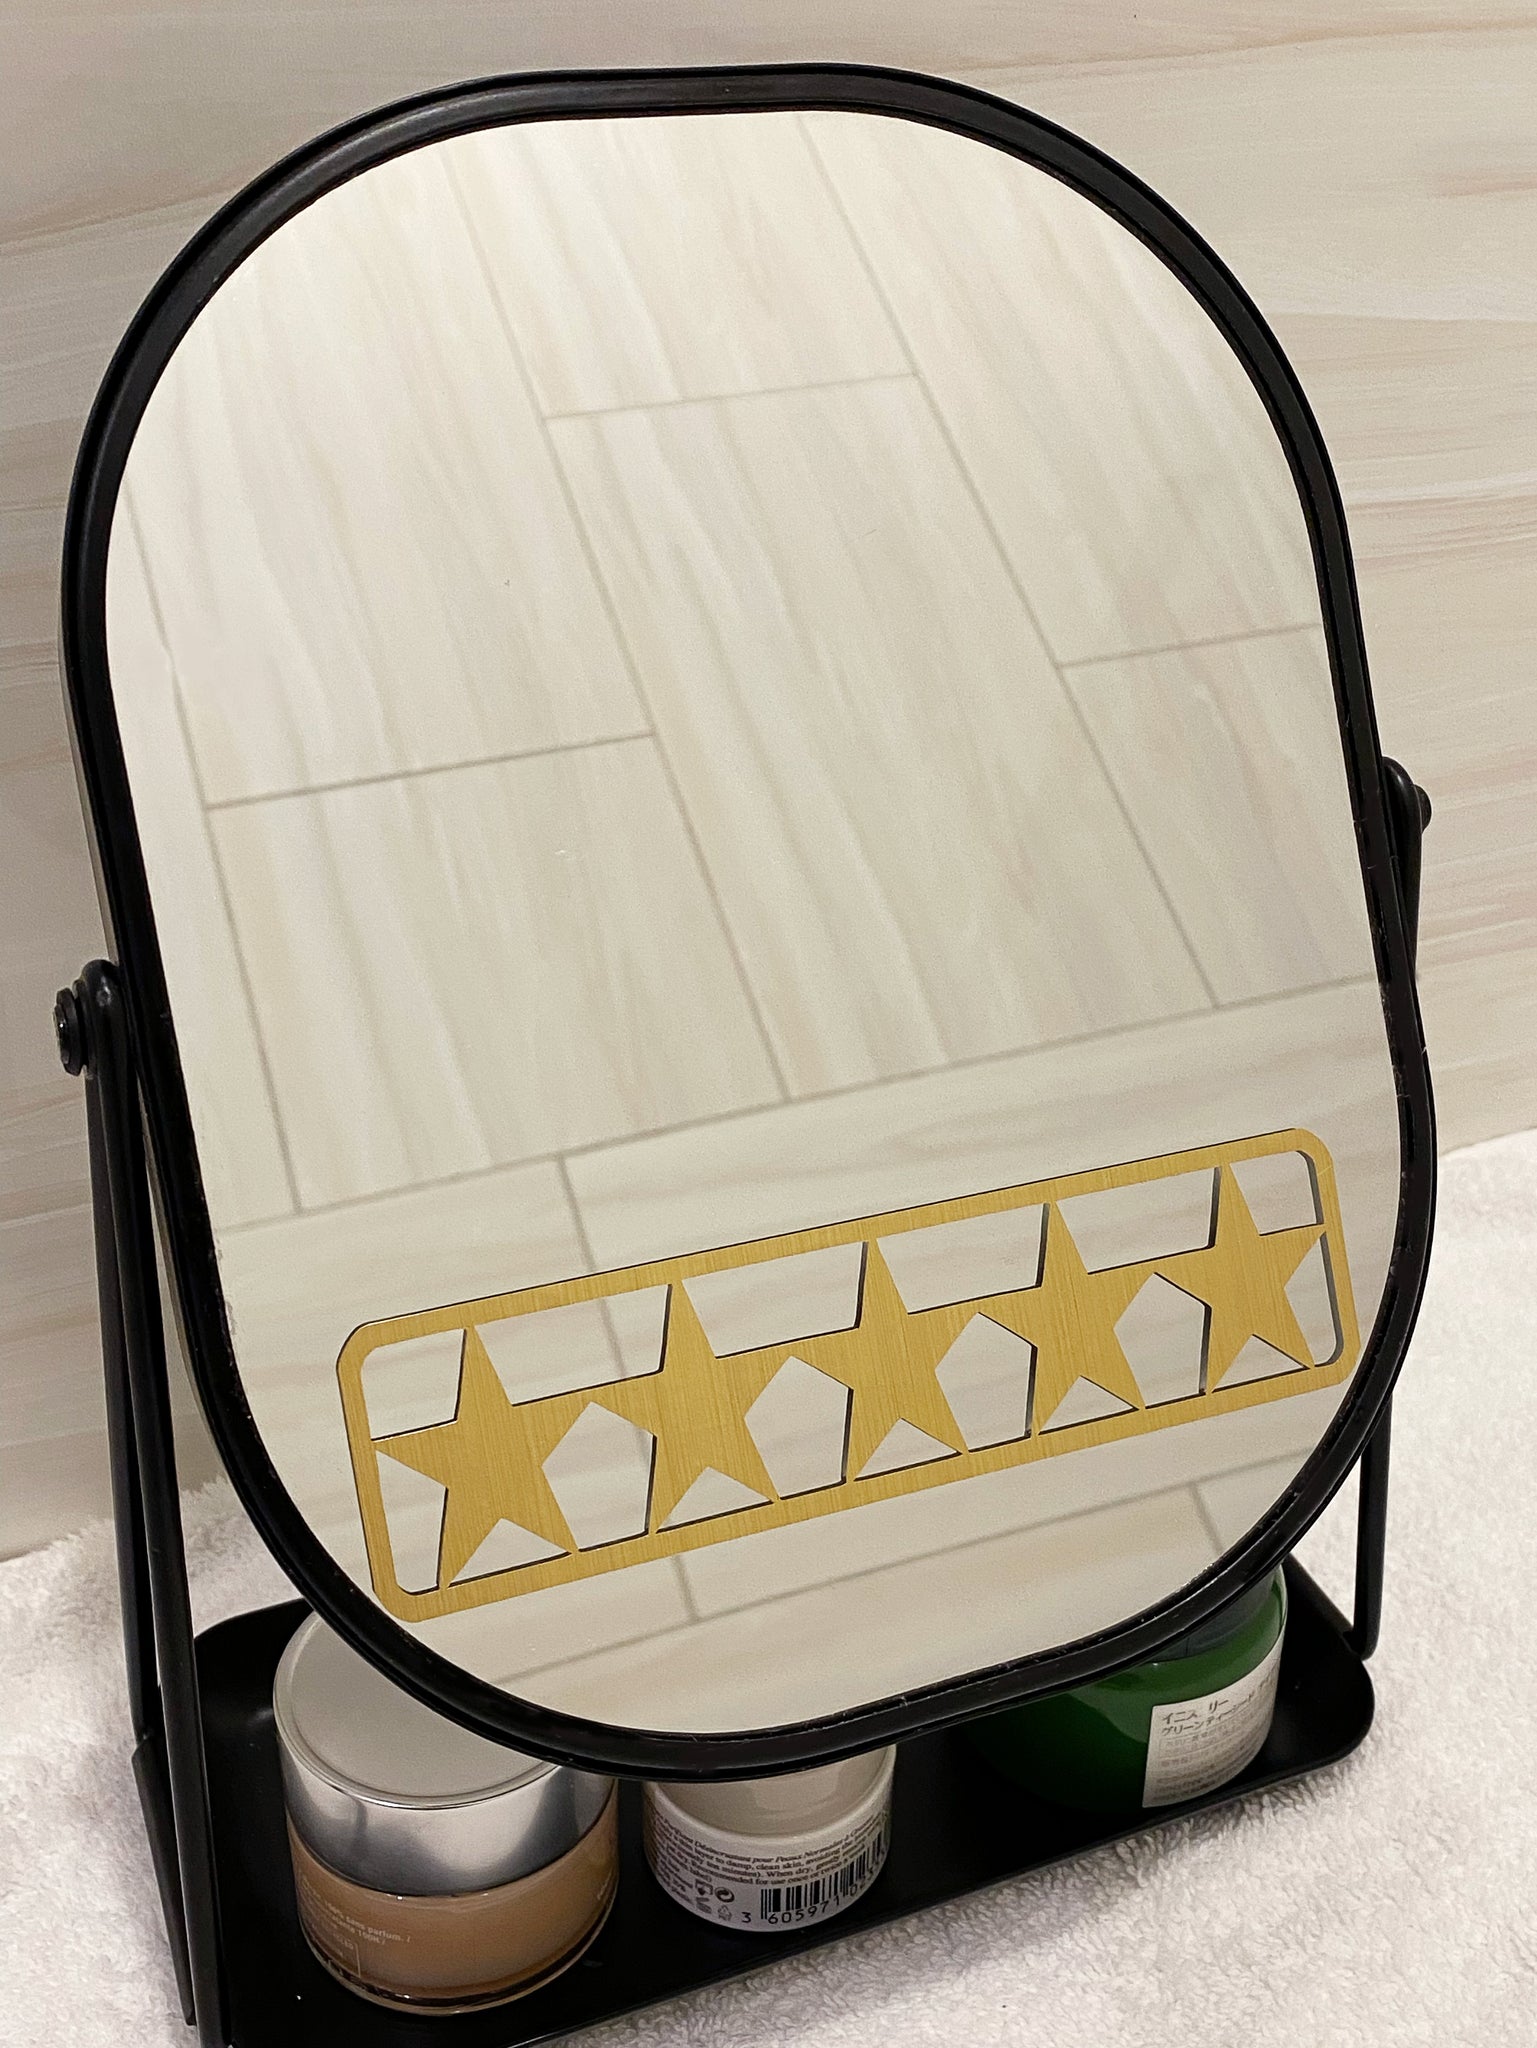 Gold 5 star mirror decal for daily positive affirmation. Mirror affirmation decal placed on modern black mirror for bathroom. Black mirror for bathroom has a tray for skincare products.